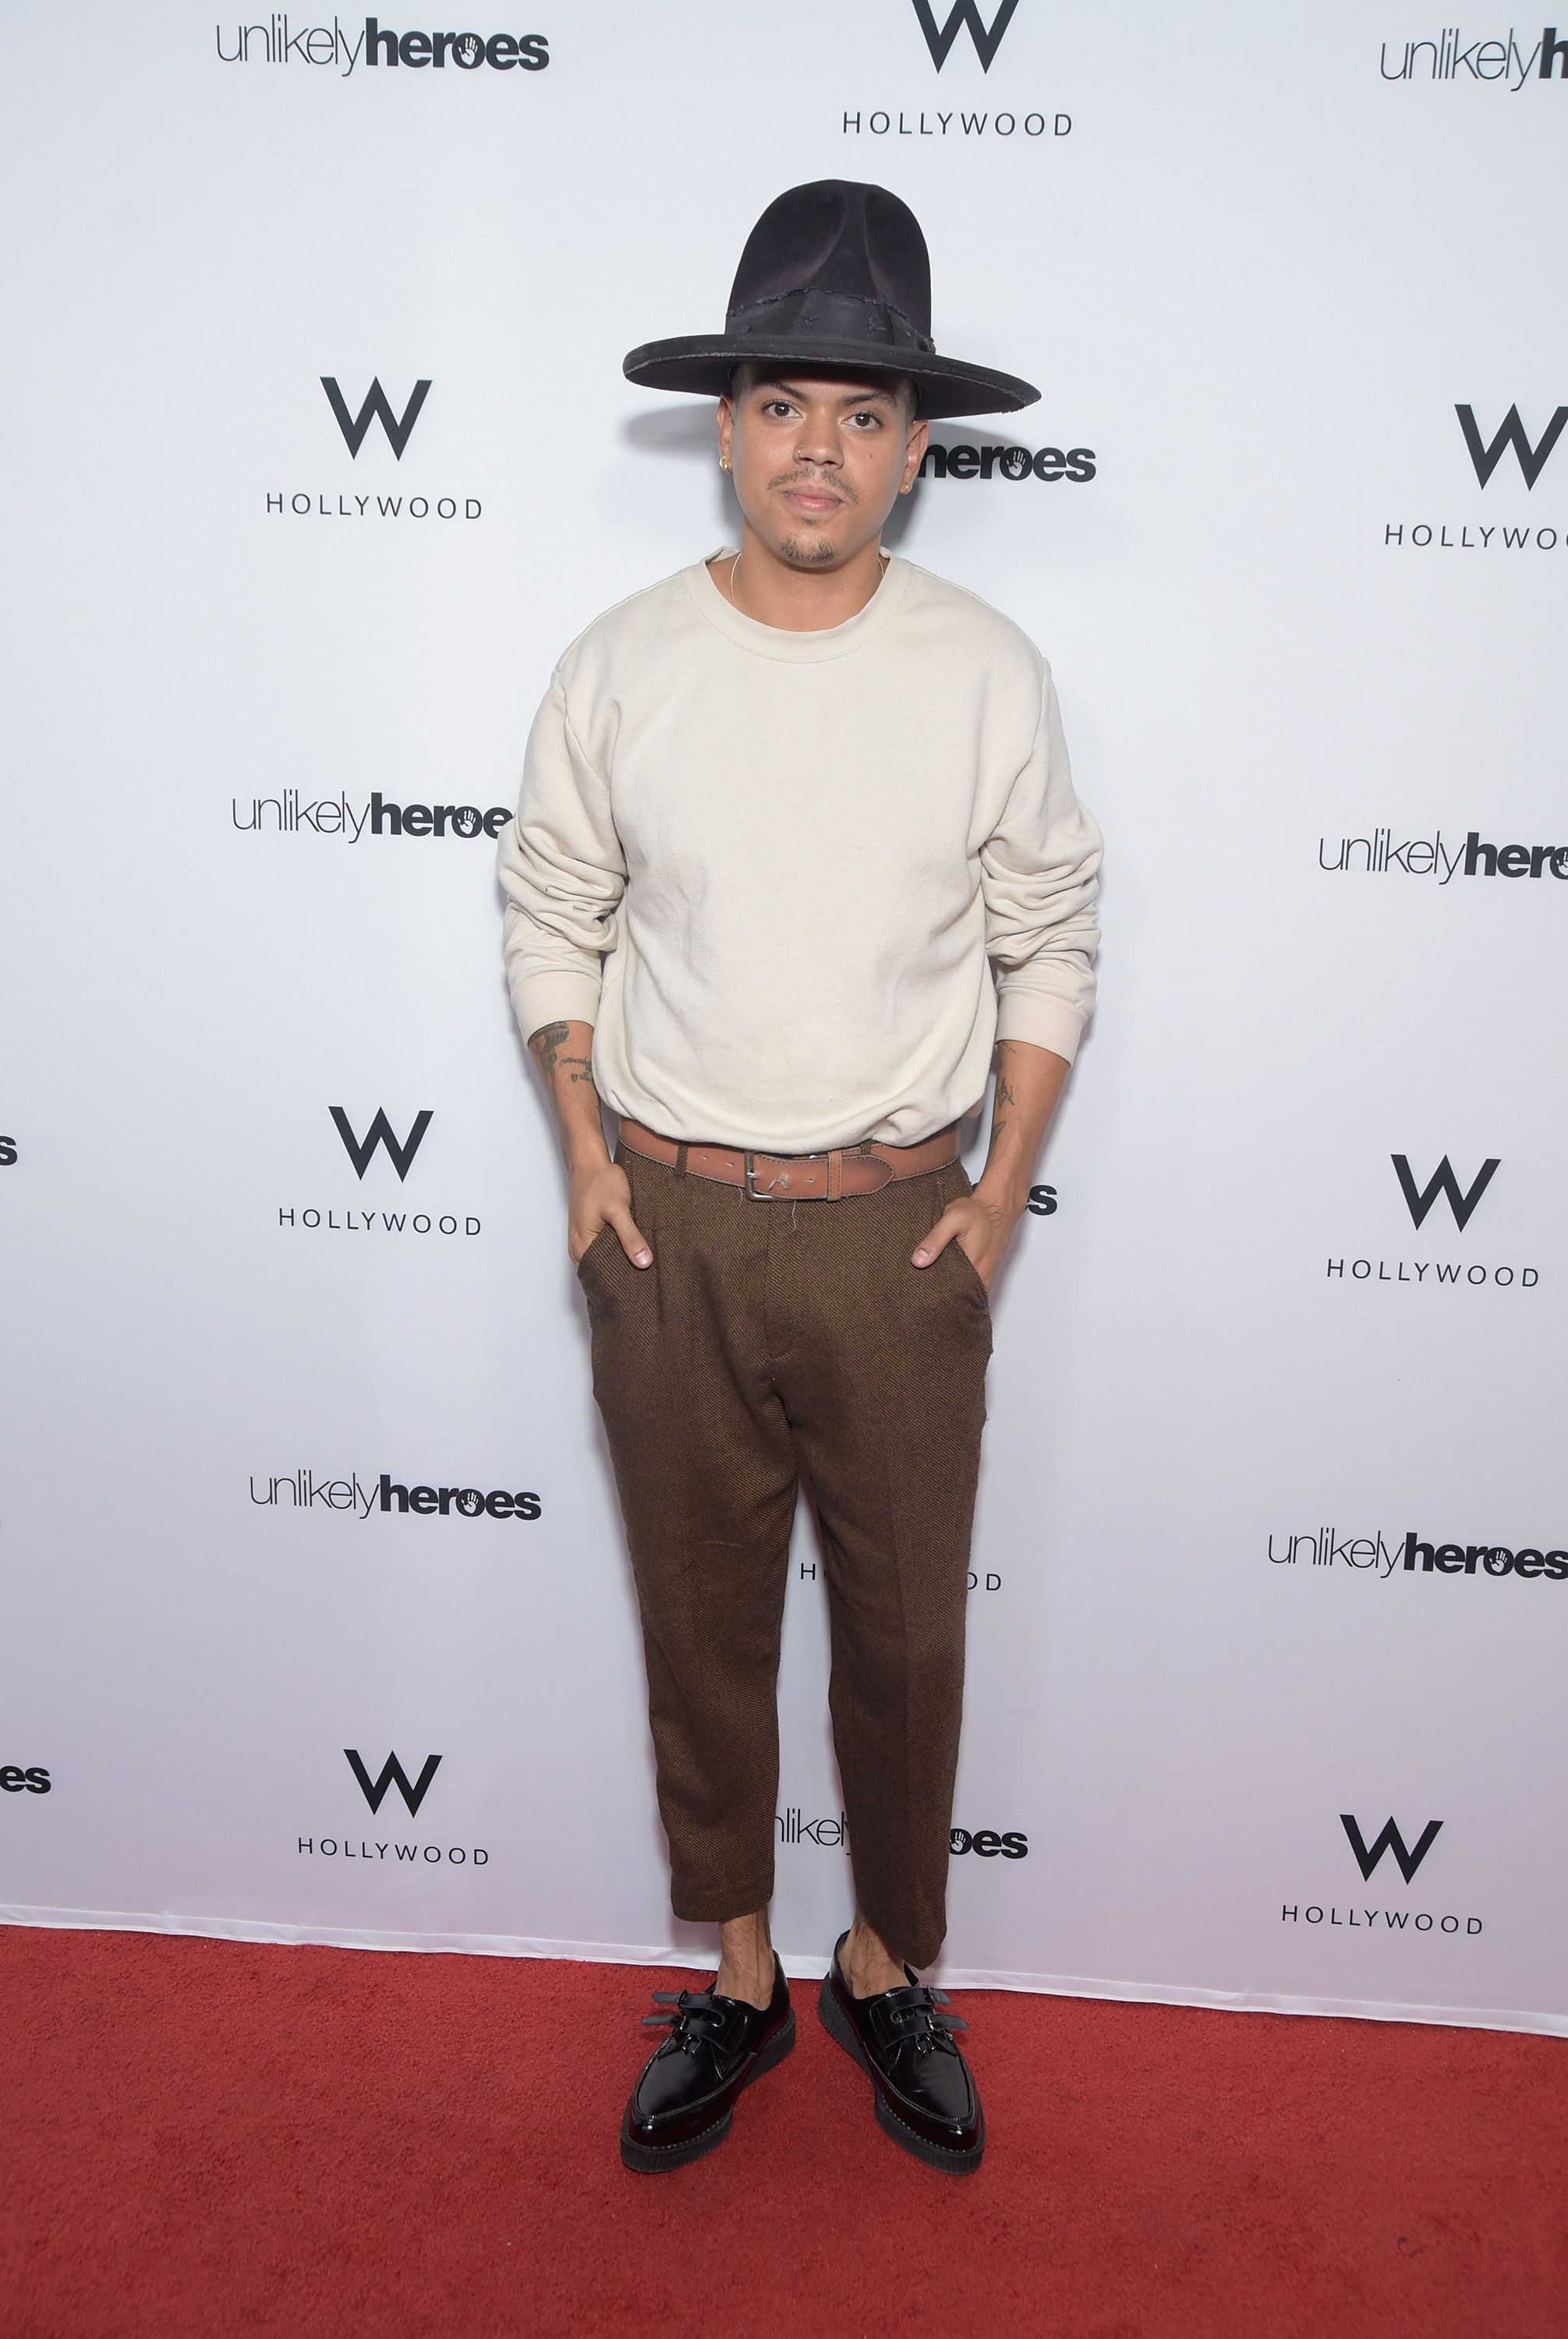 Evan Ross during "Nights Of Freedom LA" hosted by Unlikely Heroes at W Hollywood on June 21, 2018 in Hollywood, California. | Source: Getty Images